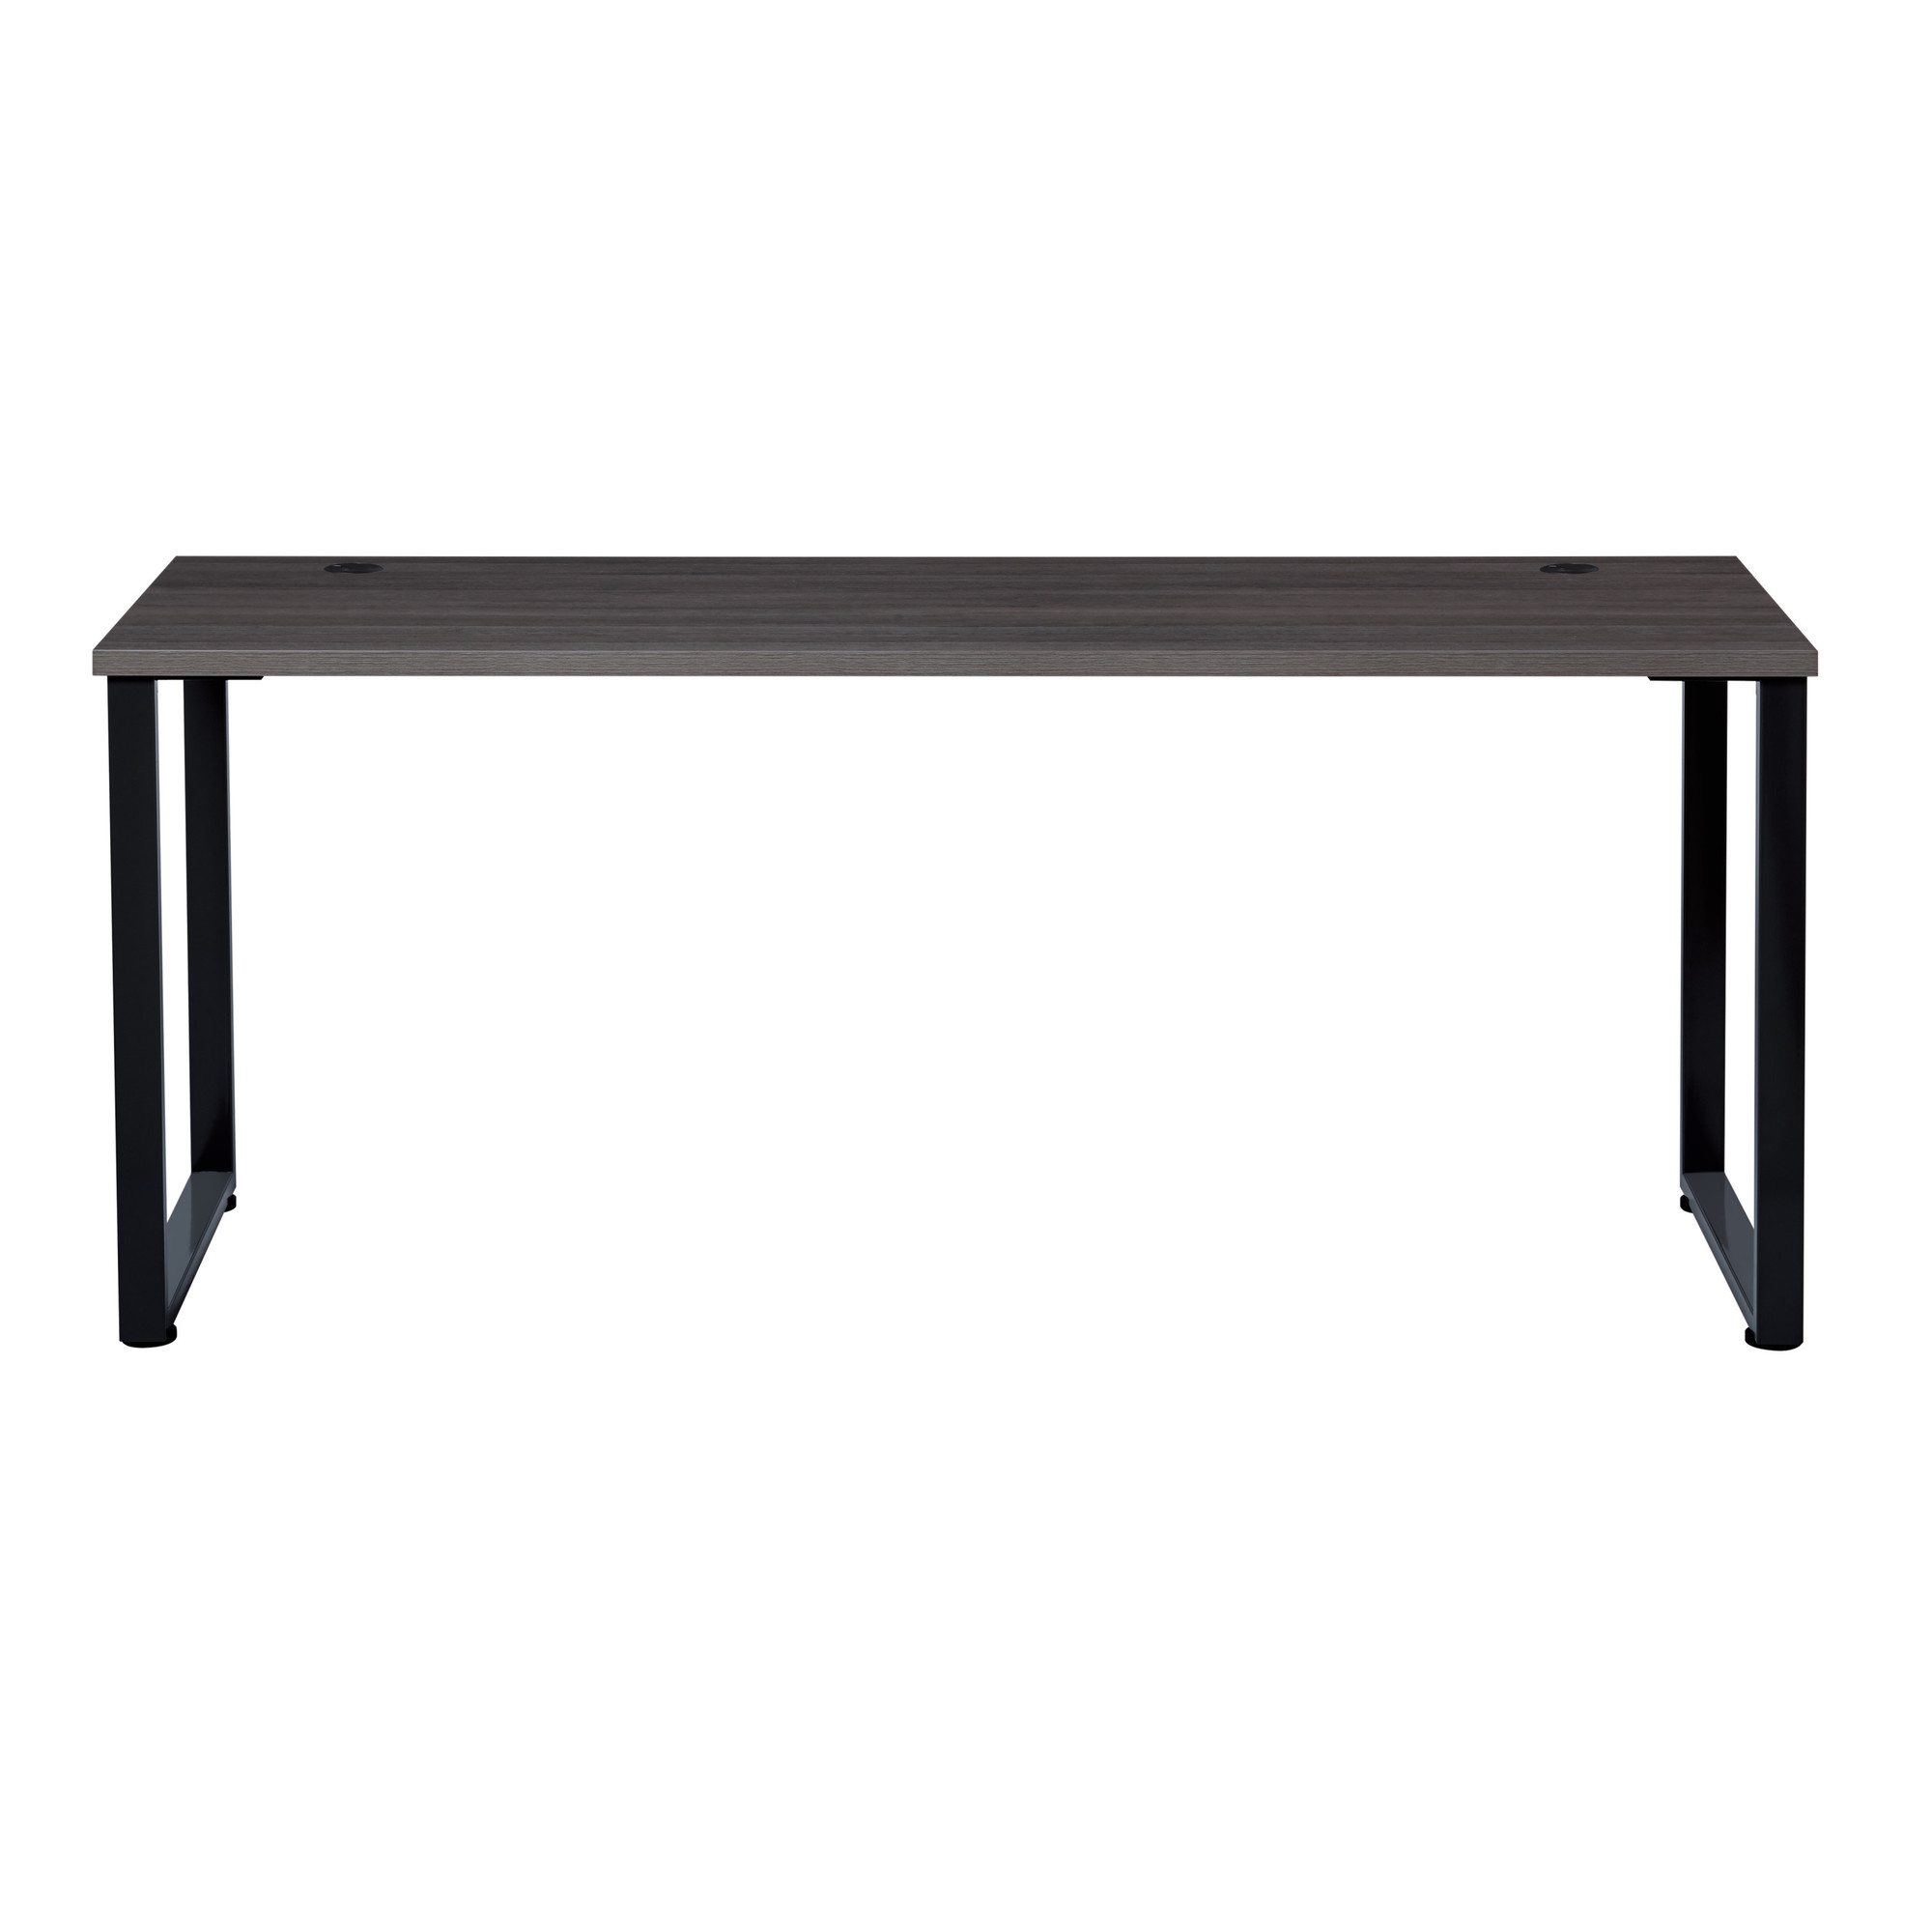 Hirsh Industries, Office Dimensions Open Desk with O-leg, Width 70.9 in, Height 29.9 in, Depth 23.6 in, Model 24778